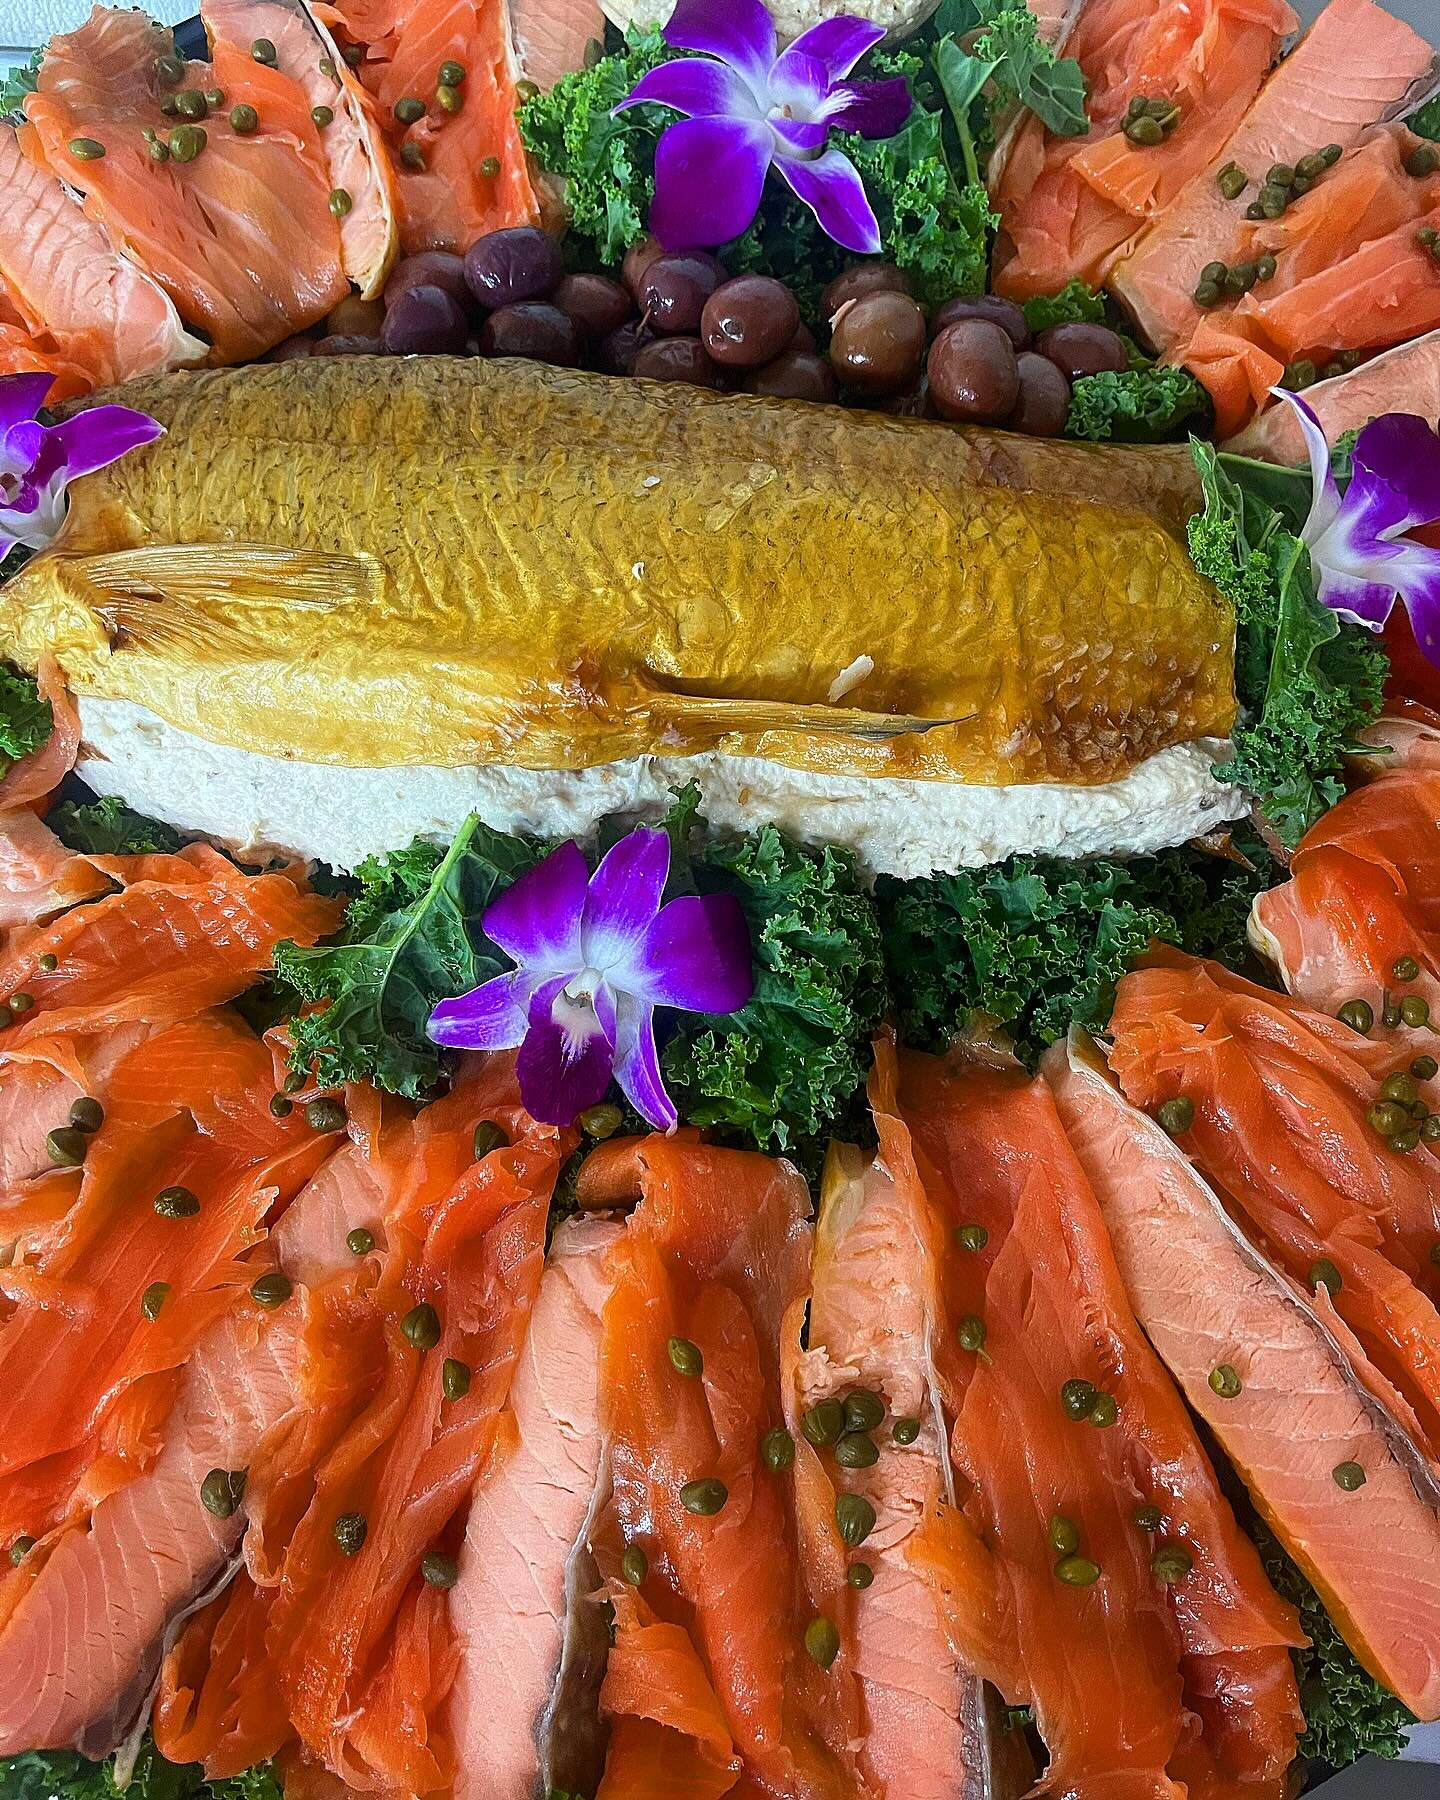 We hope the new year brings you lox of health, happiness, and good food!!! #HappyNewYear #NoOtherDeli